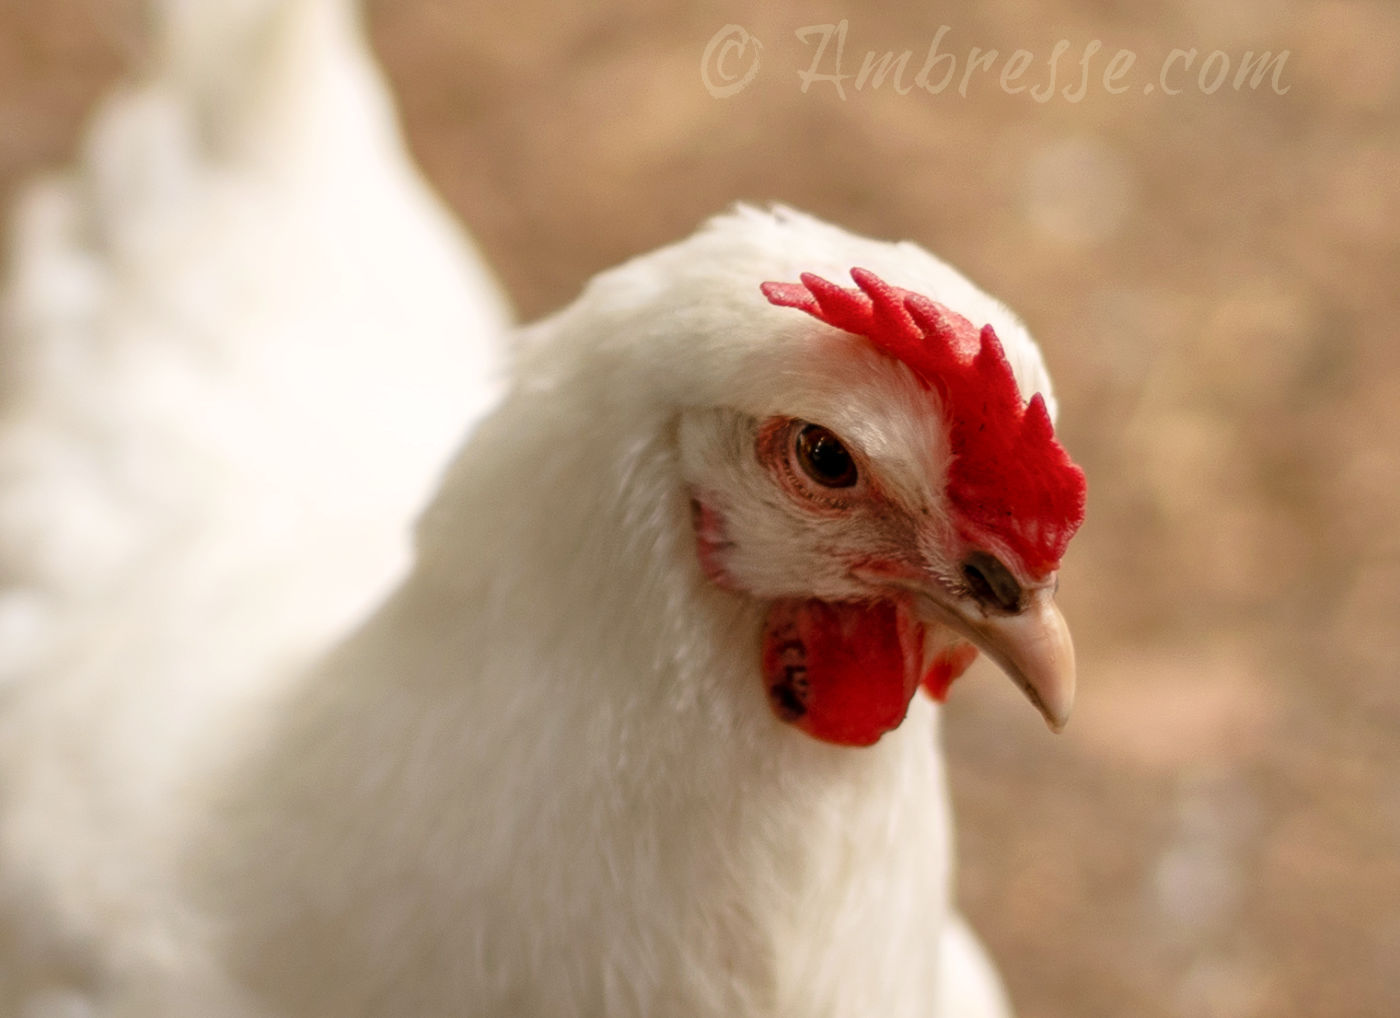 Miss Priss, an American Bresse hen at Ambresse Acres, in Port Angeles, Washington.